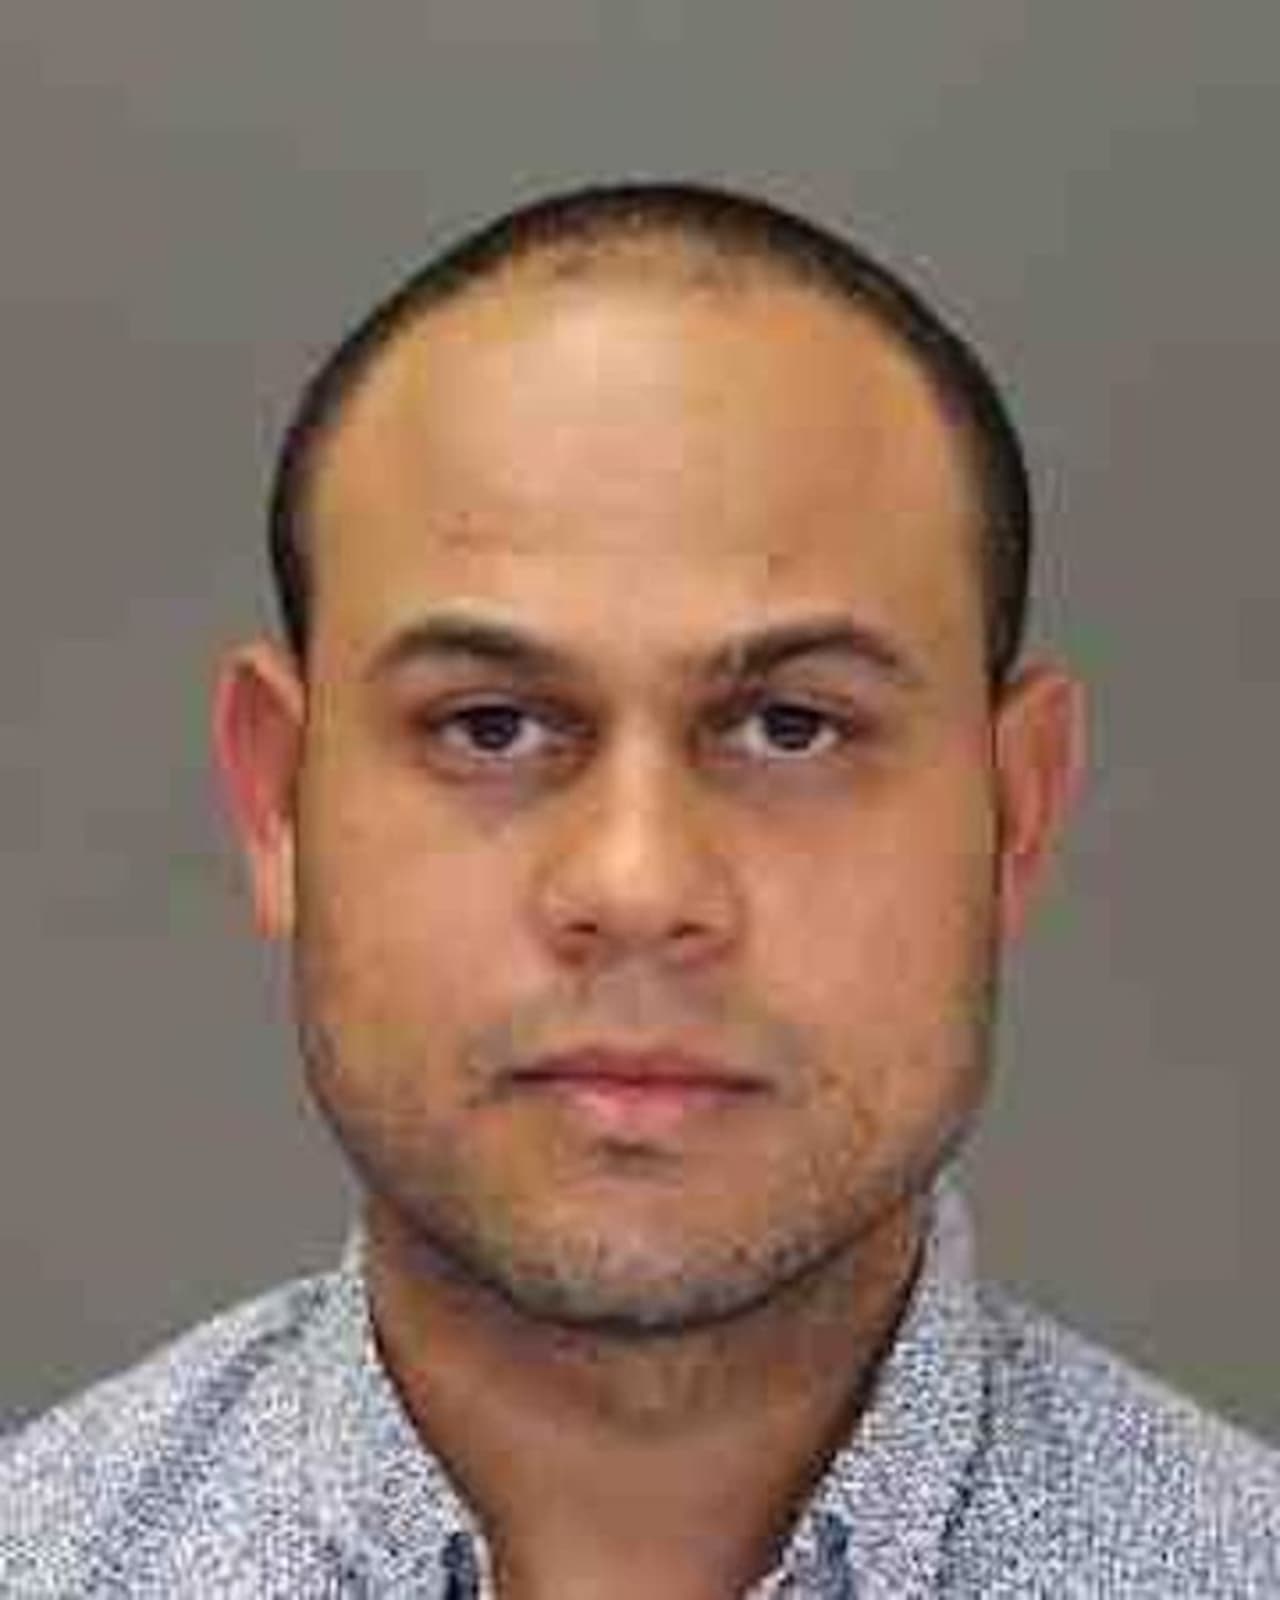 Adraian Valentin-Polanco is being at the Ramapo Police Department on charges that he assaulted two local women as they got out of their vehicles.